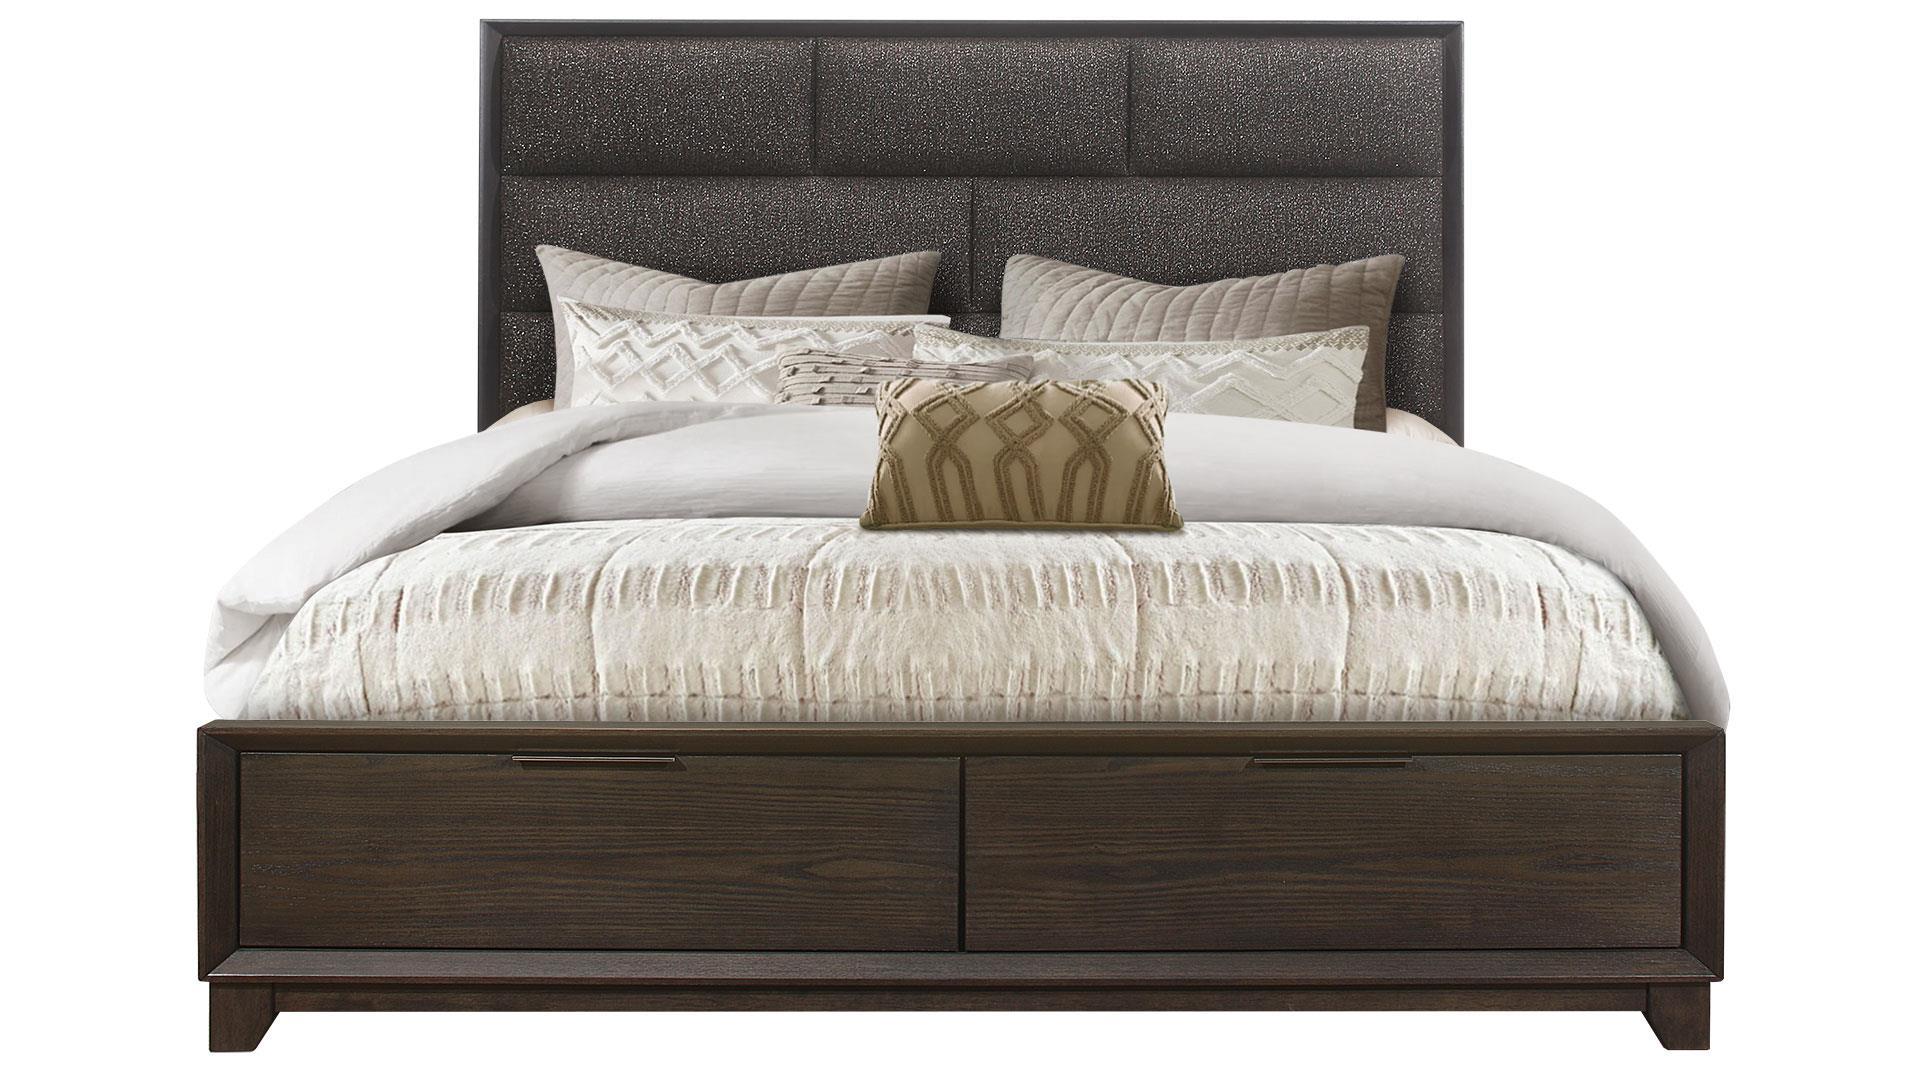 Contemporary Platform Bed WILLOW WILLOW-KB in Gray, Chocolate Fabric